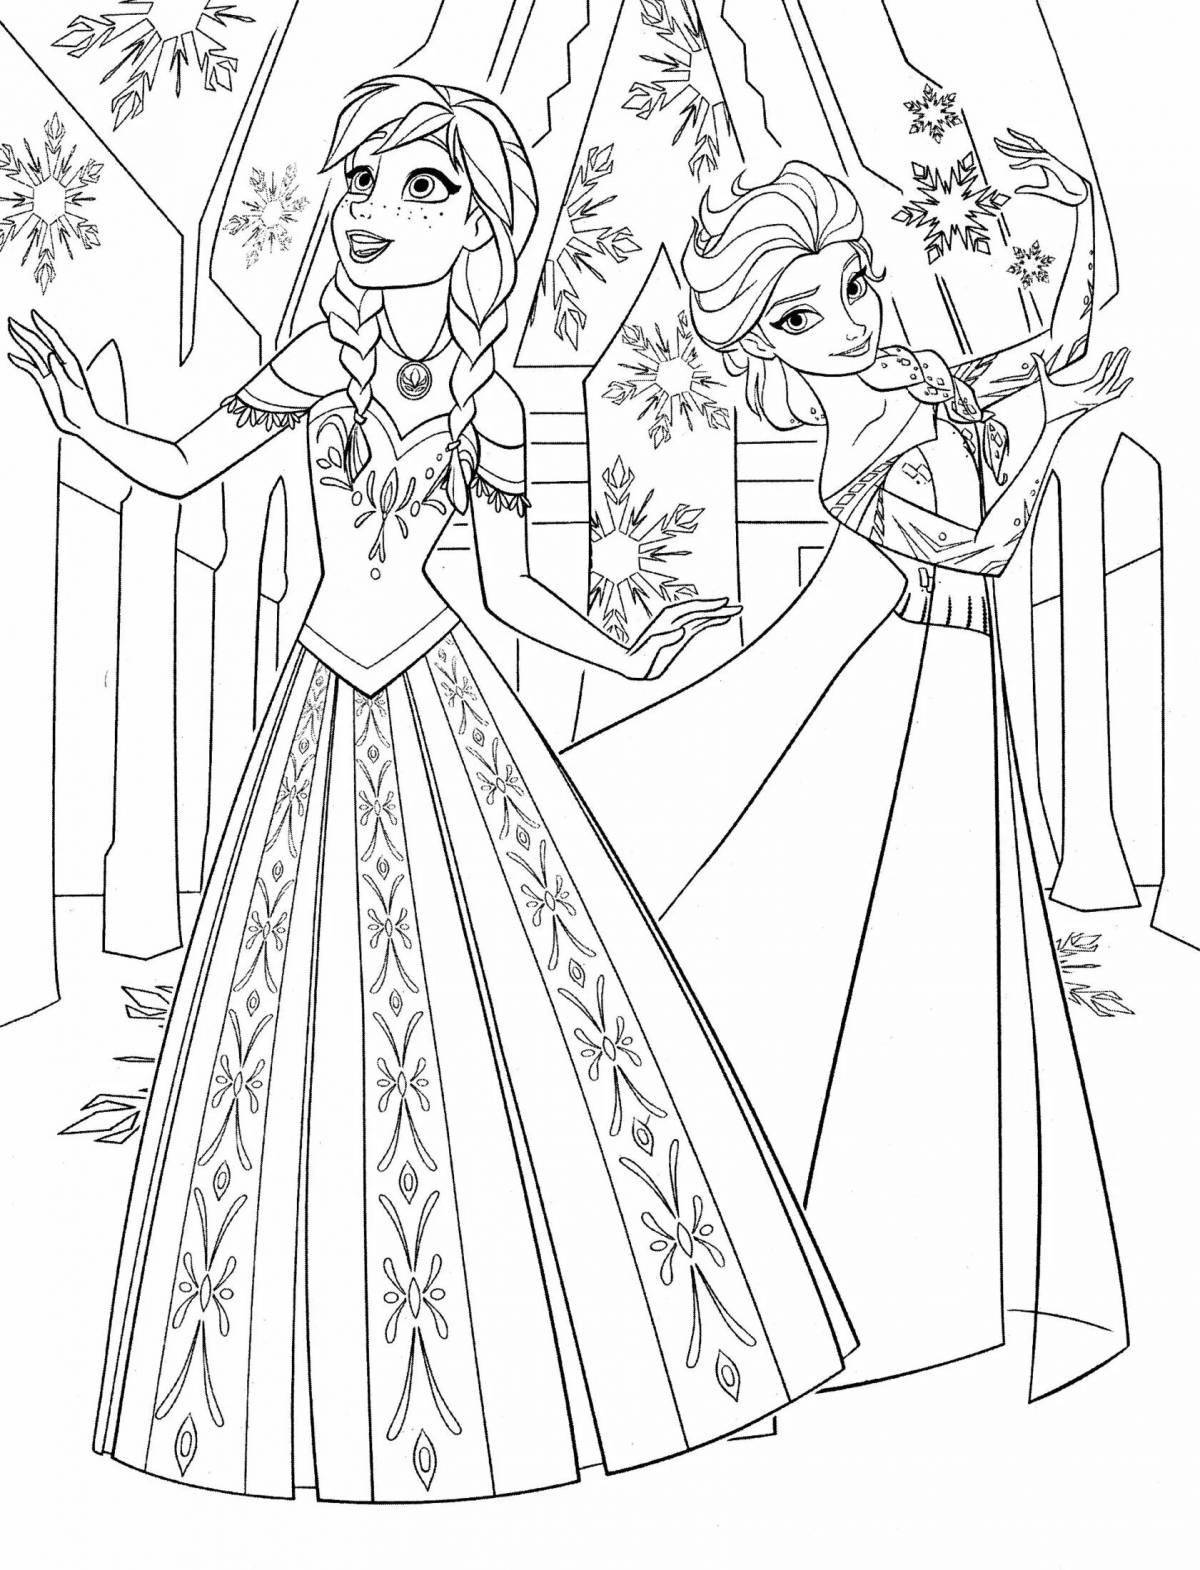 Frozen playful coloring page for 5-6 year olds